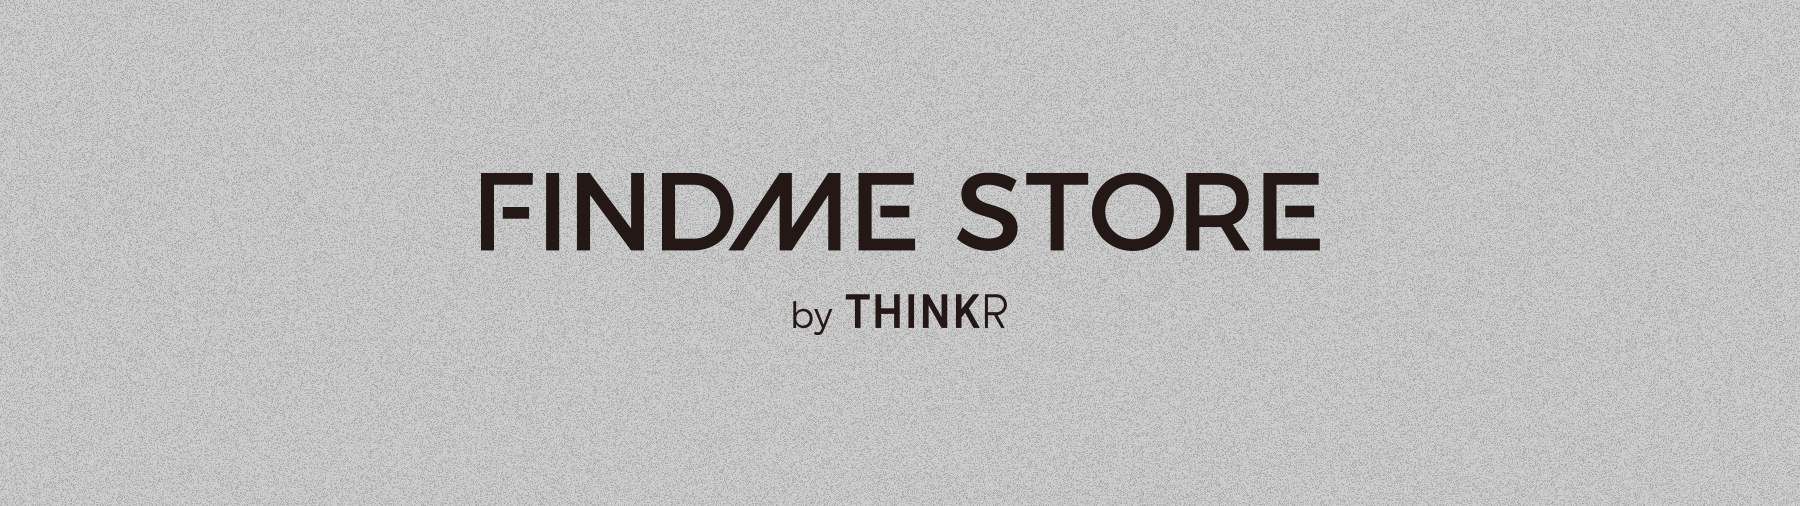 FINDME STORE by THINKR